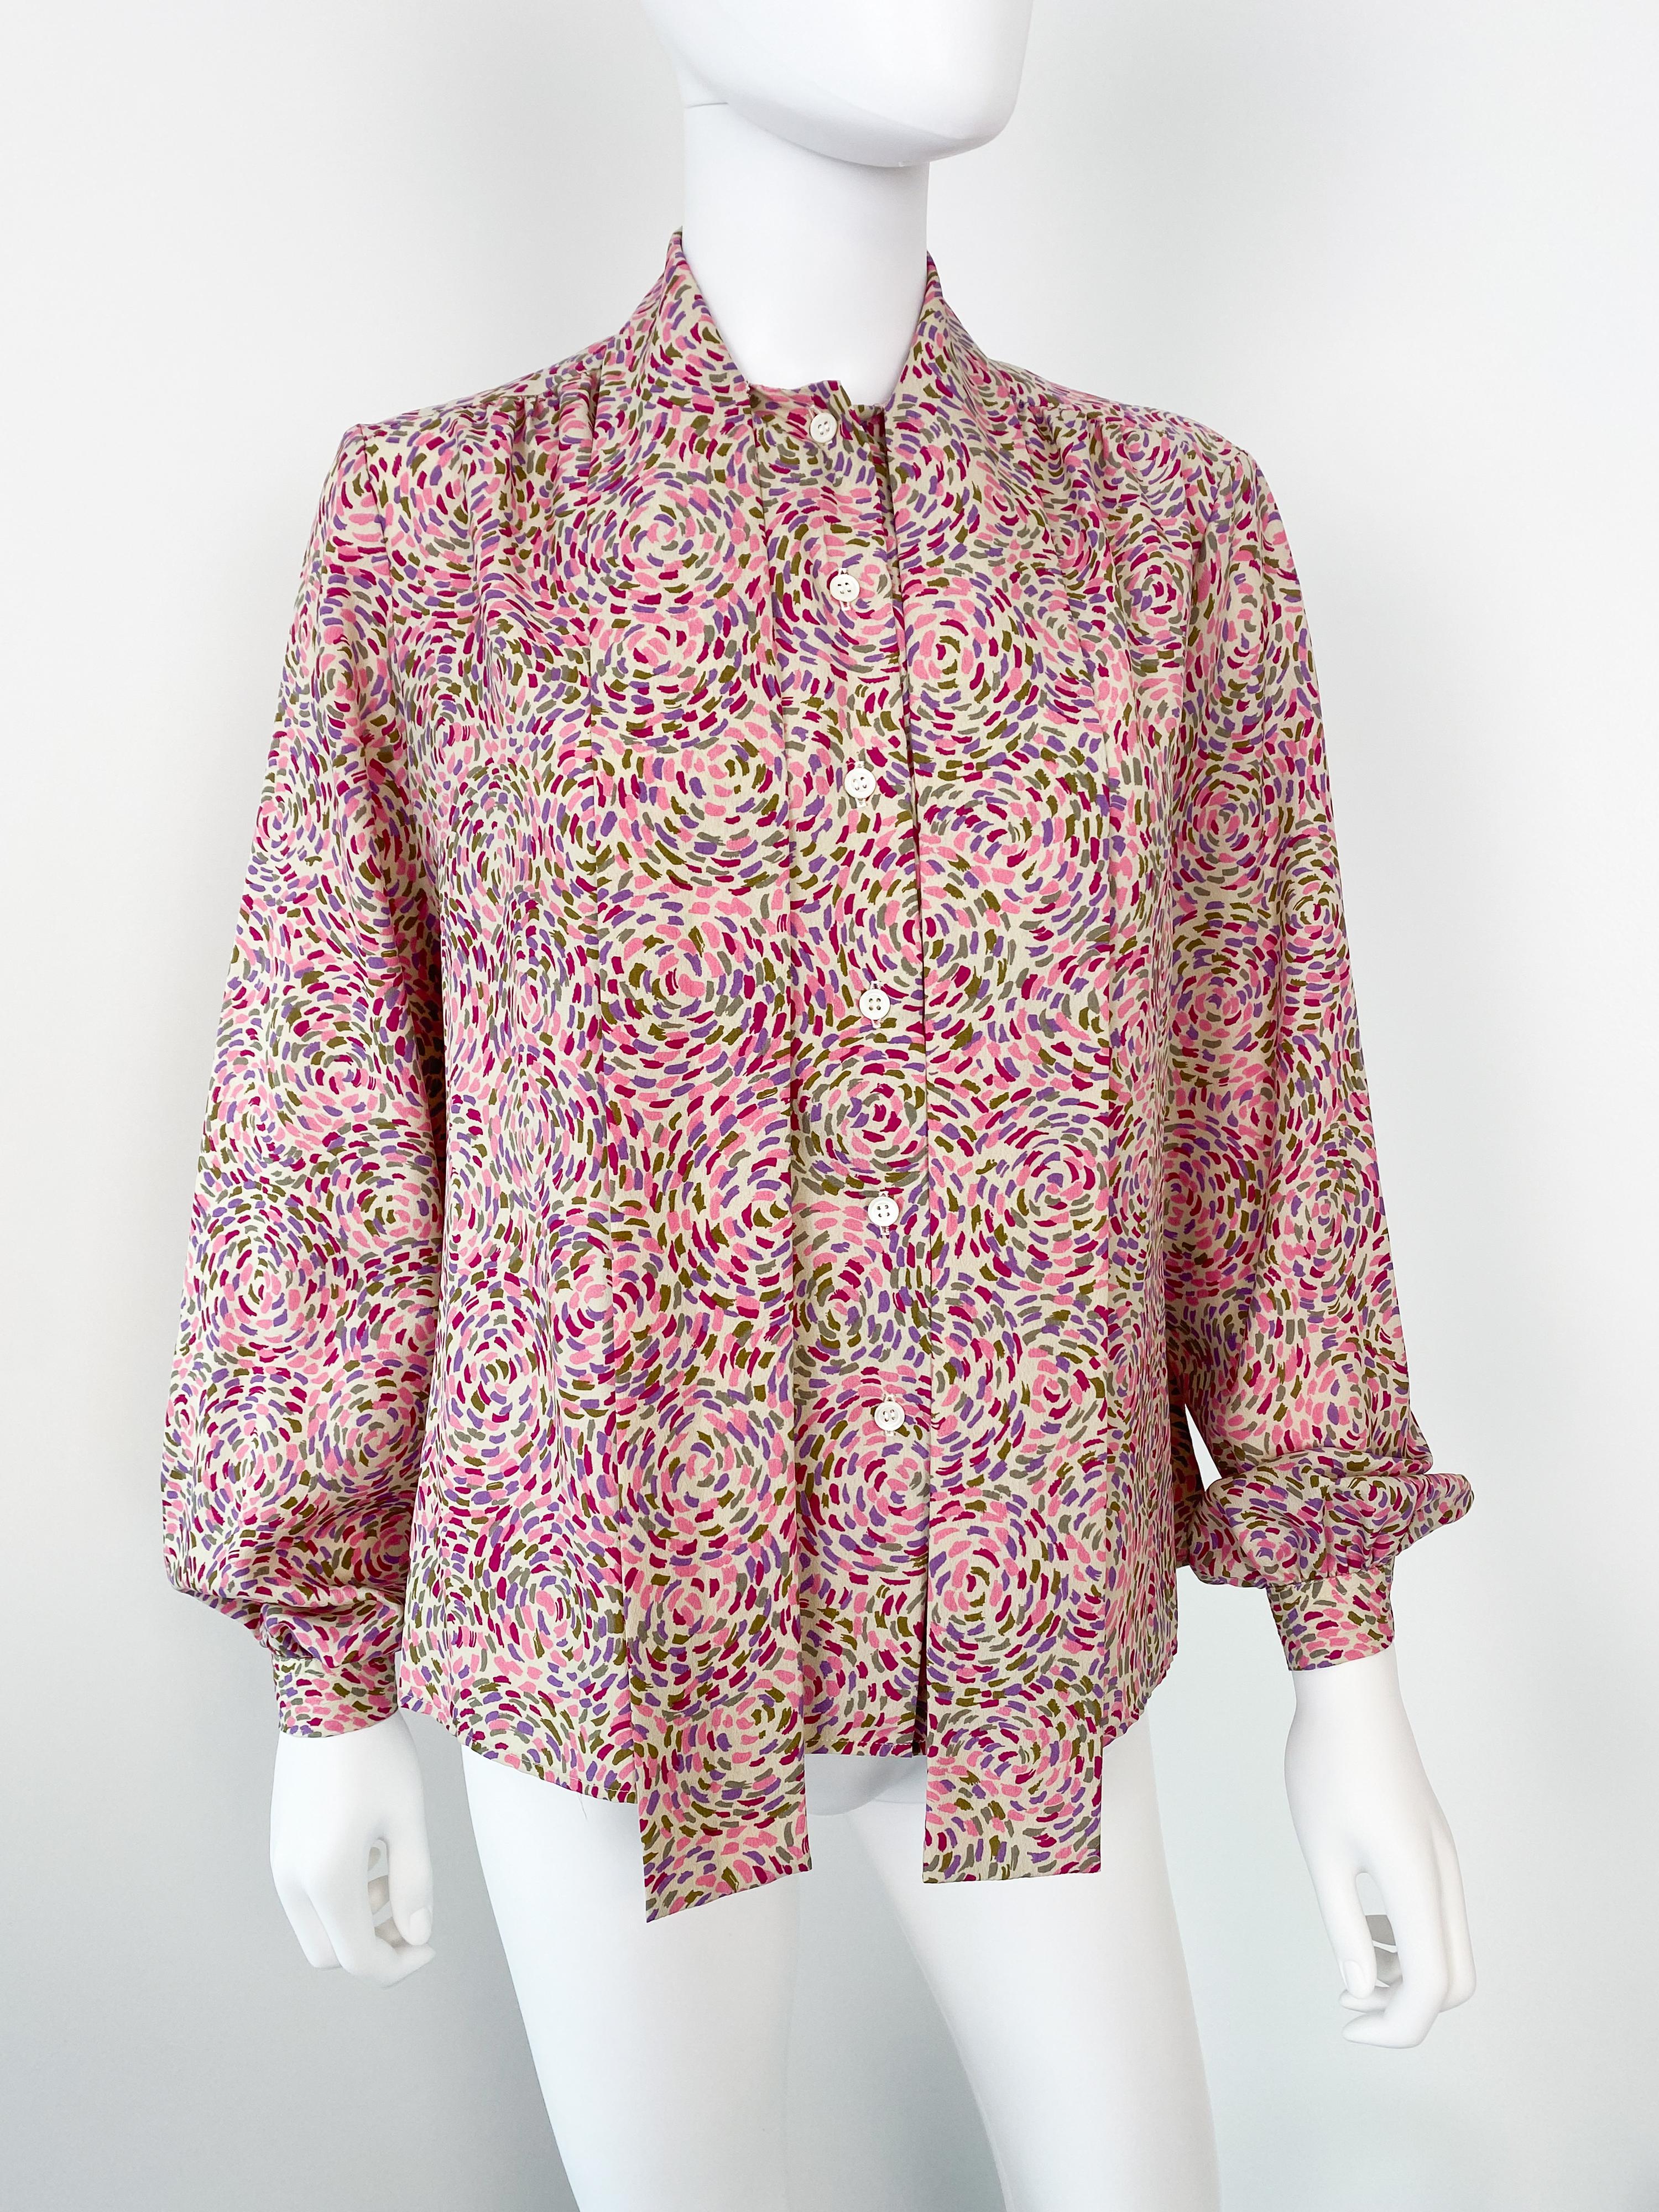 Women's or Men's Vintage 1980s Silky Polyester Blouse Top Pink Pointillism Print Size 8 For Sale